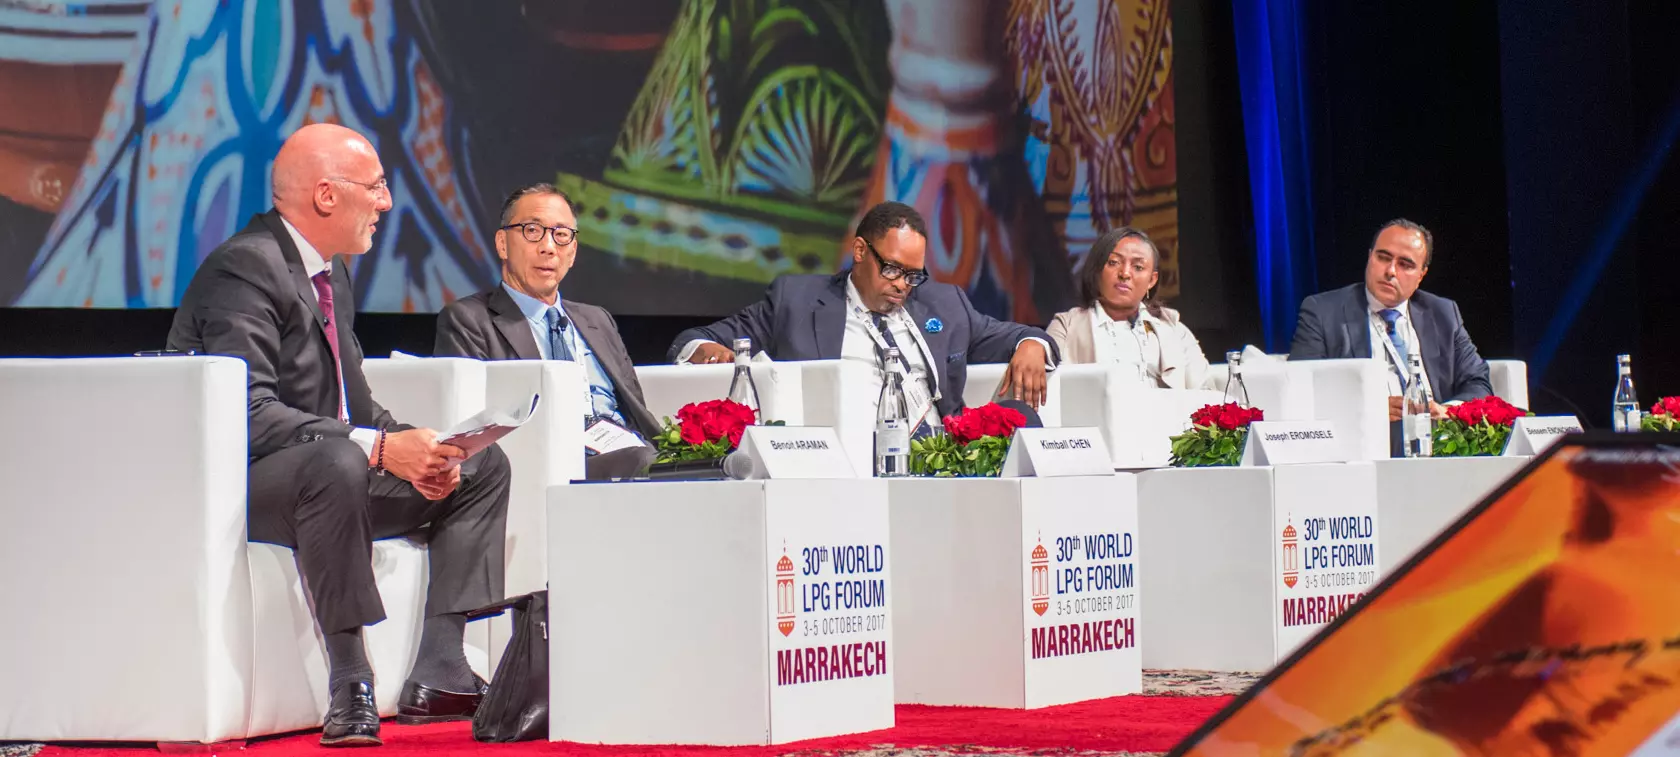 30th World LPG Forum wrapped up in Marrakech